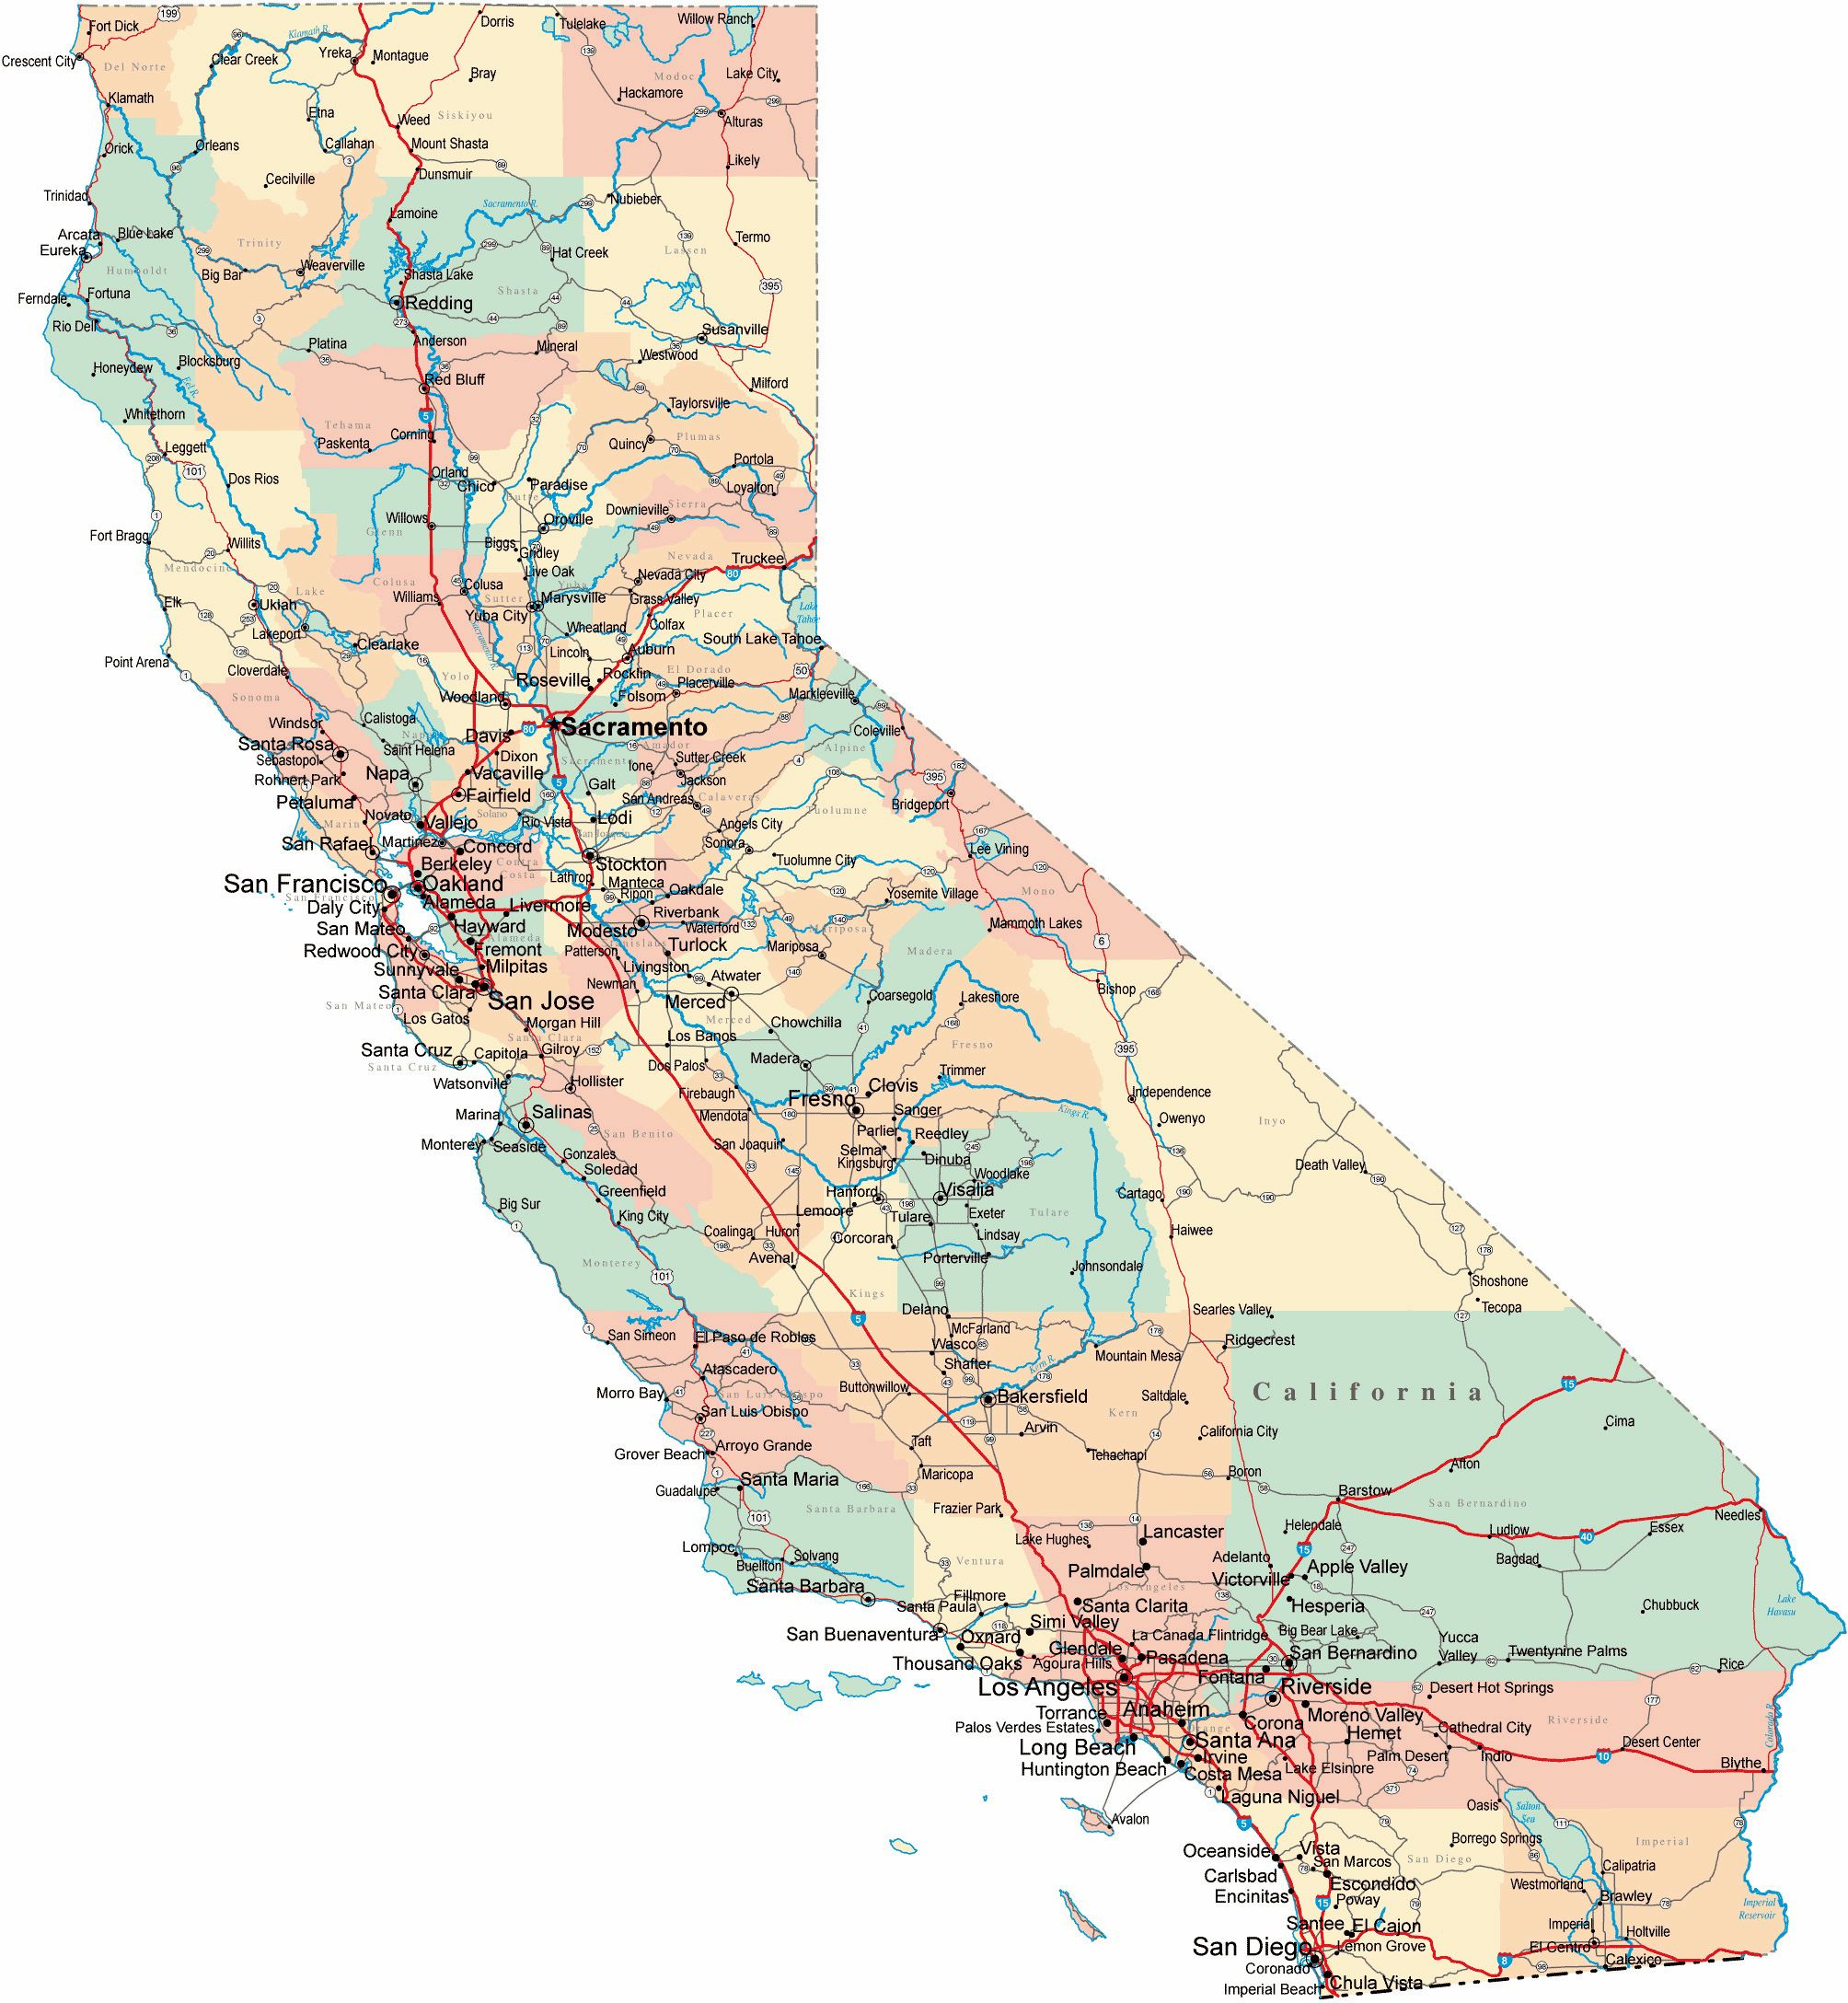 Large California Maps For Free Download And Print | High-Resolution - California Road Atlas Map